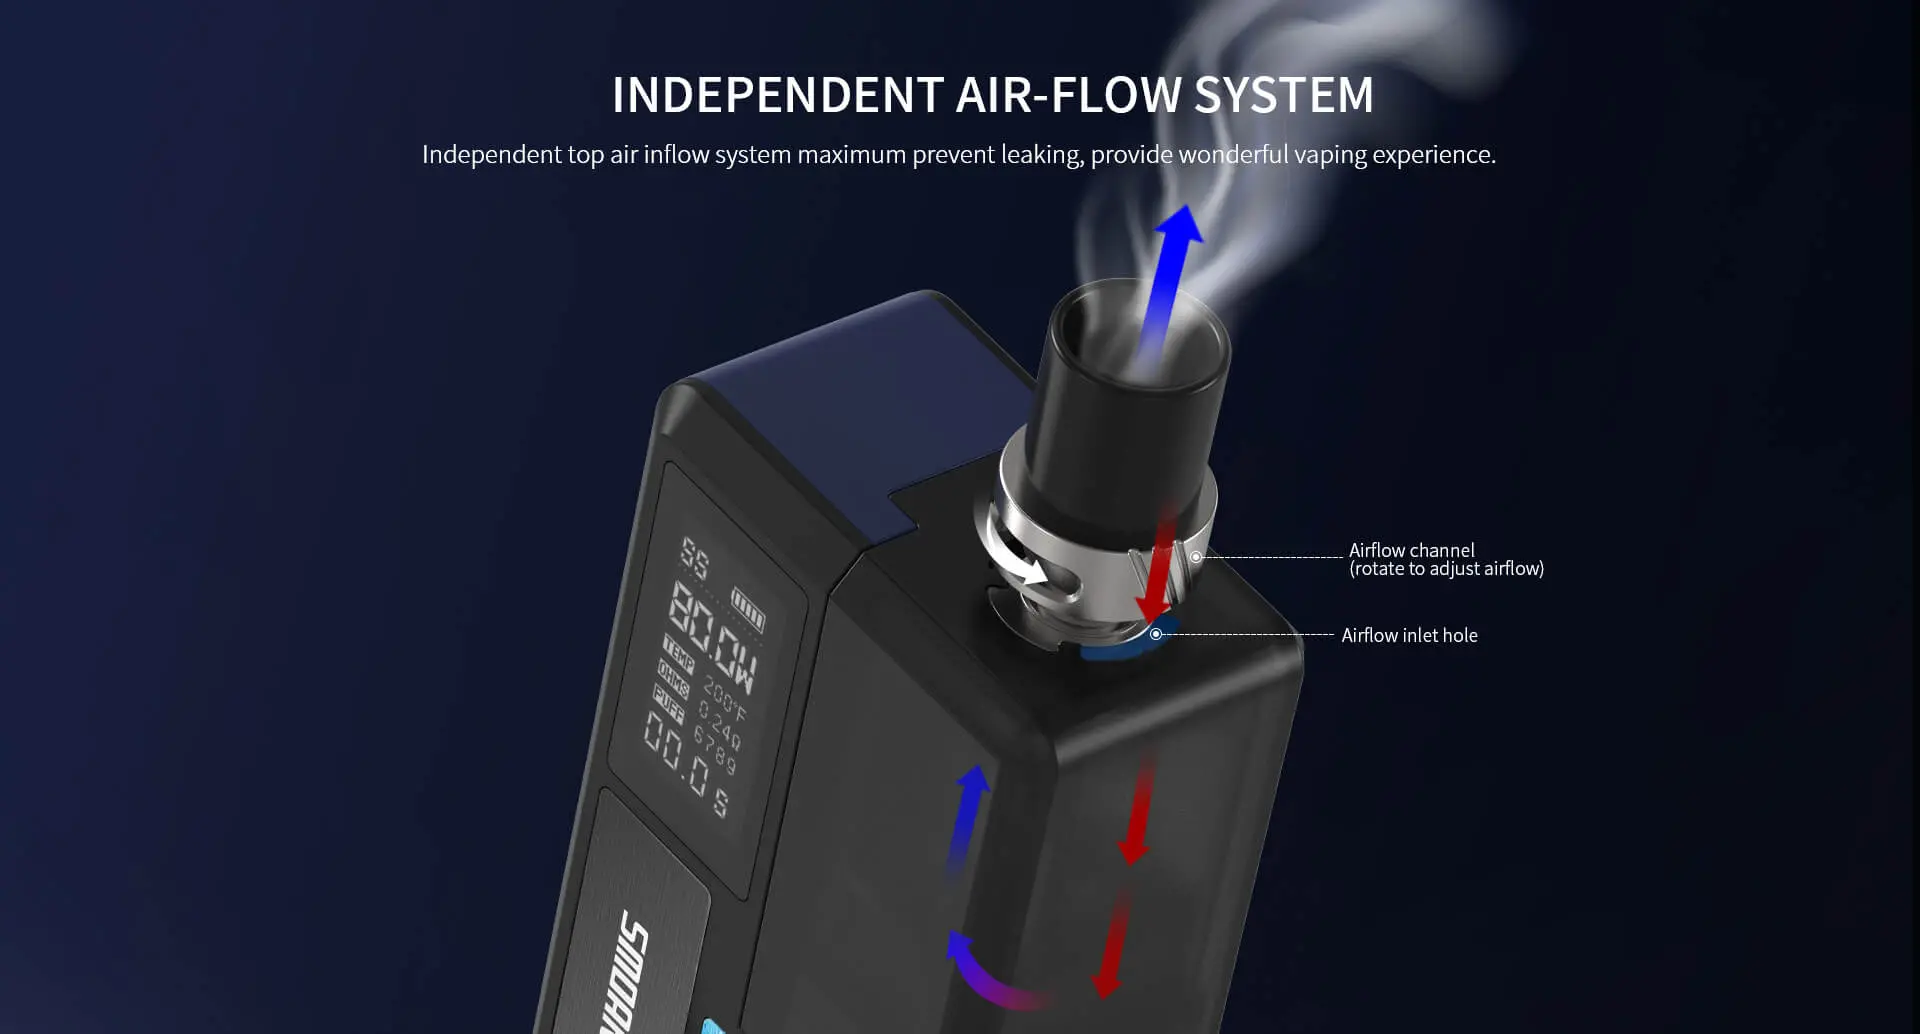 smaont knight 80 INDEPENDENT AIR-FLOW SYSTEM